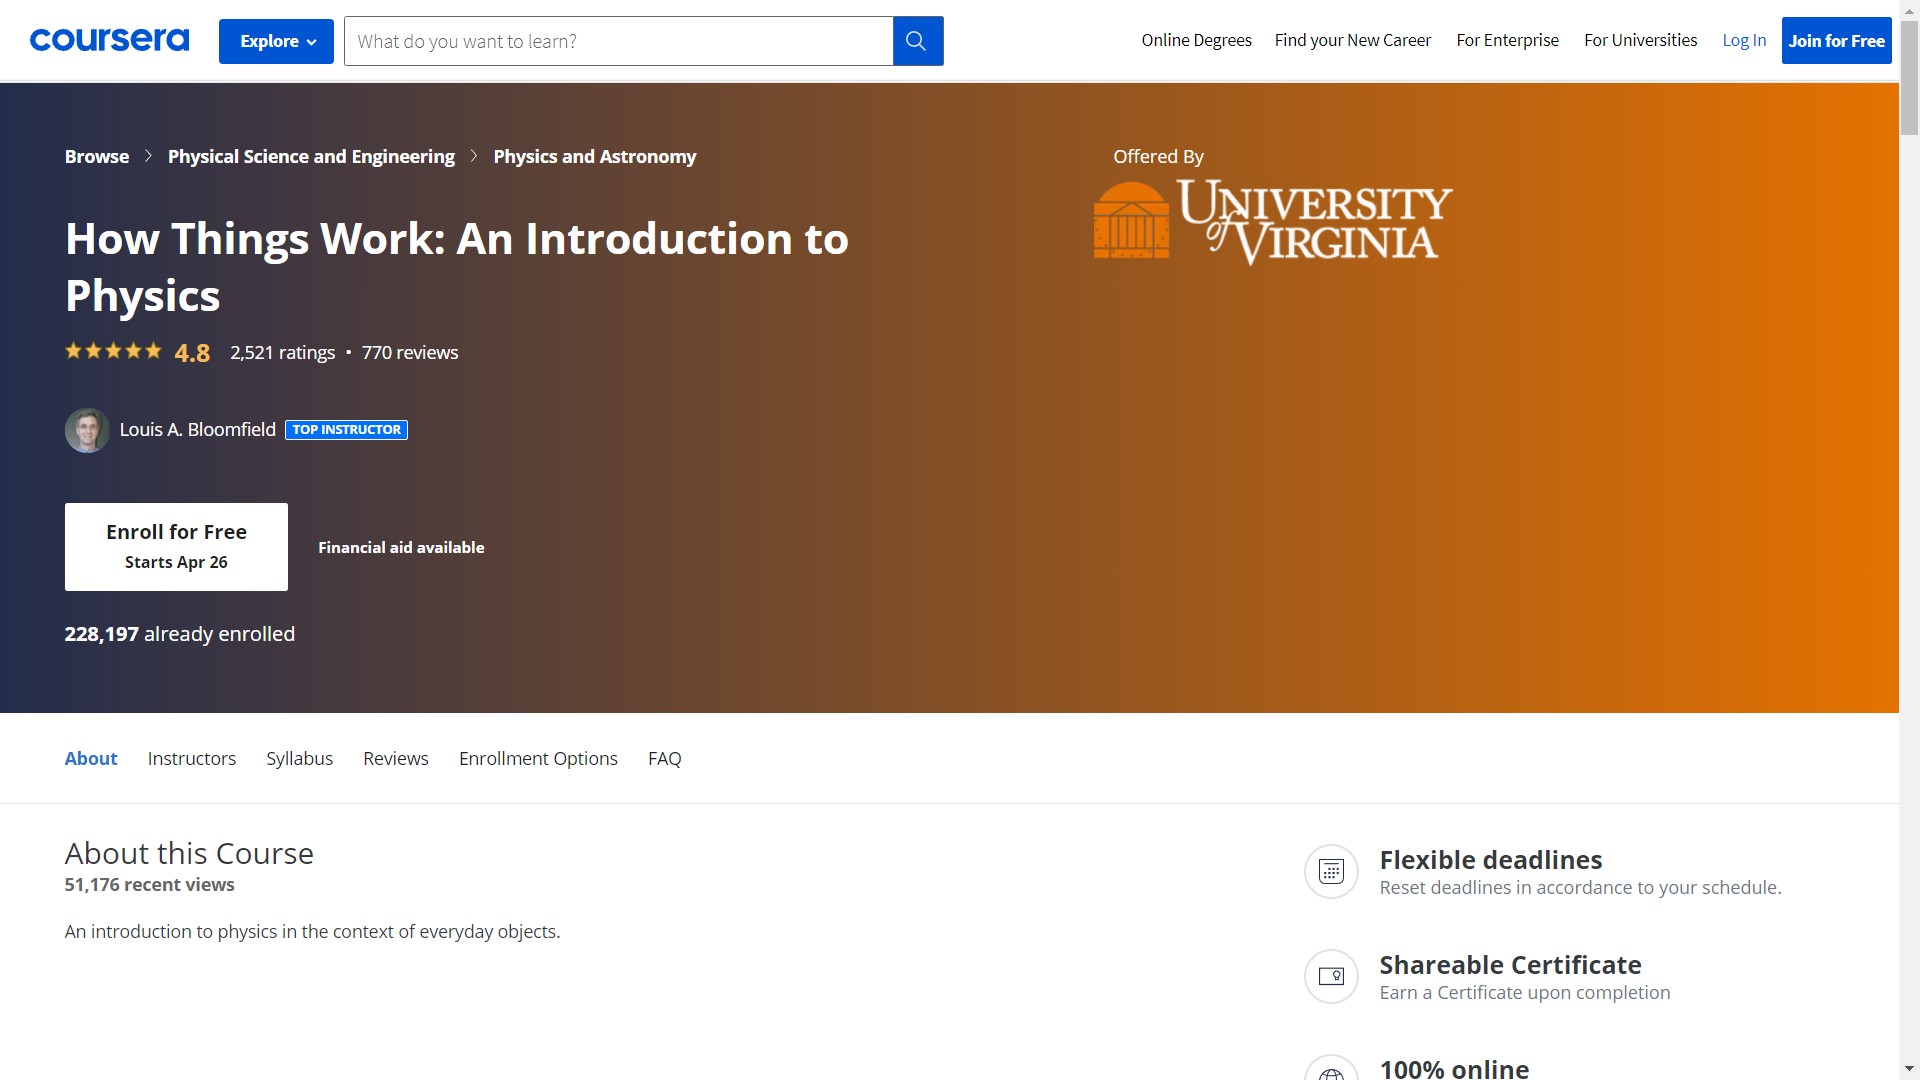 How Things Work: An Introduction to Physics. University of Virginia via Coursera.